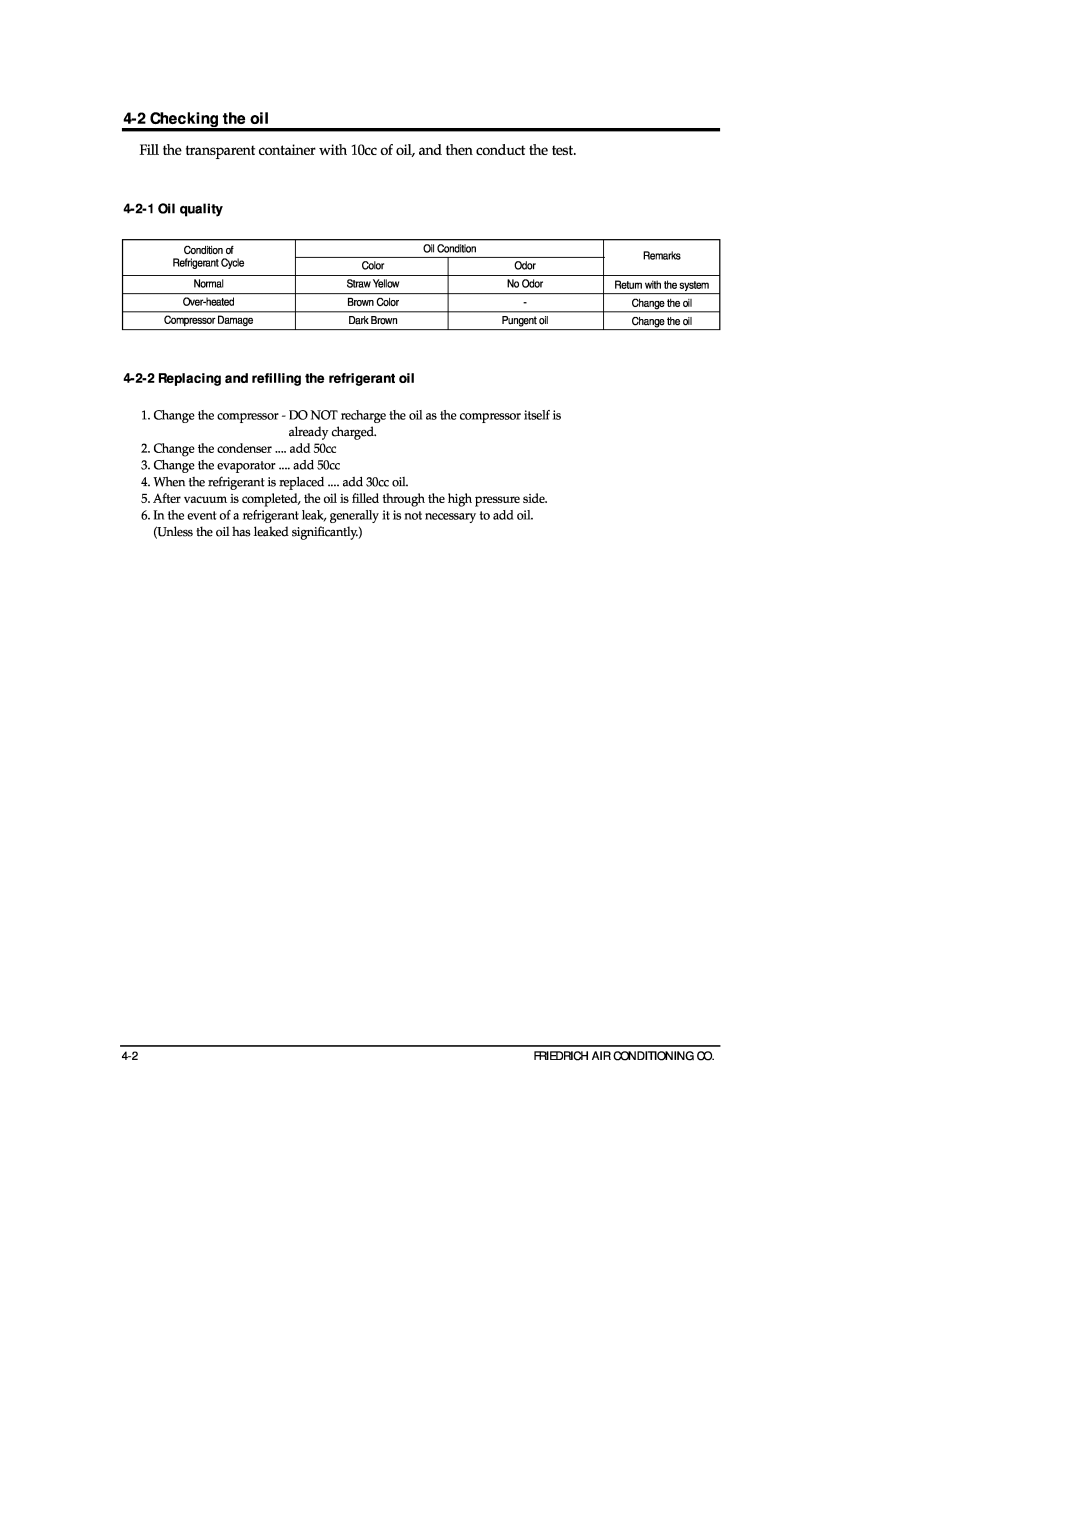 Friedrich SP05A10 service manual 4-2Checking the oil, 4-2-1Oil quality, 4-2-2Replacing and refilling the refrigerant oil 